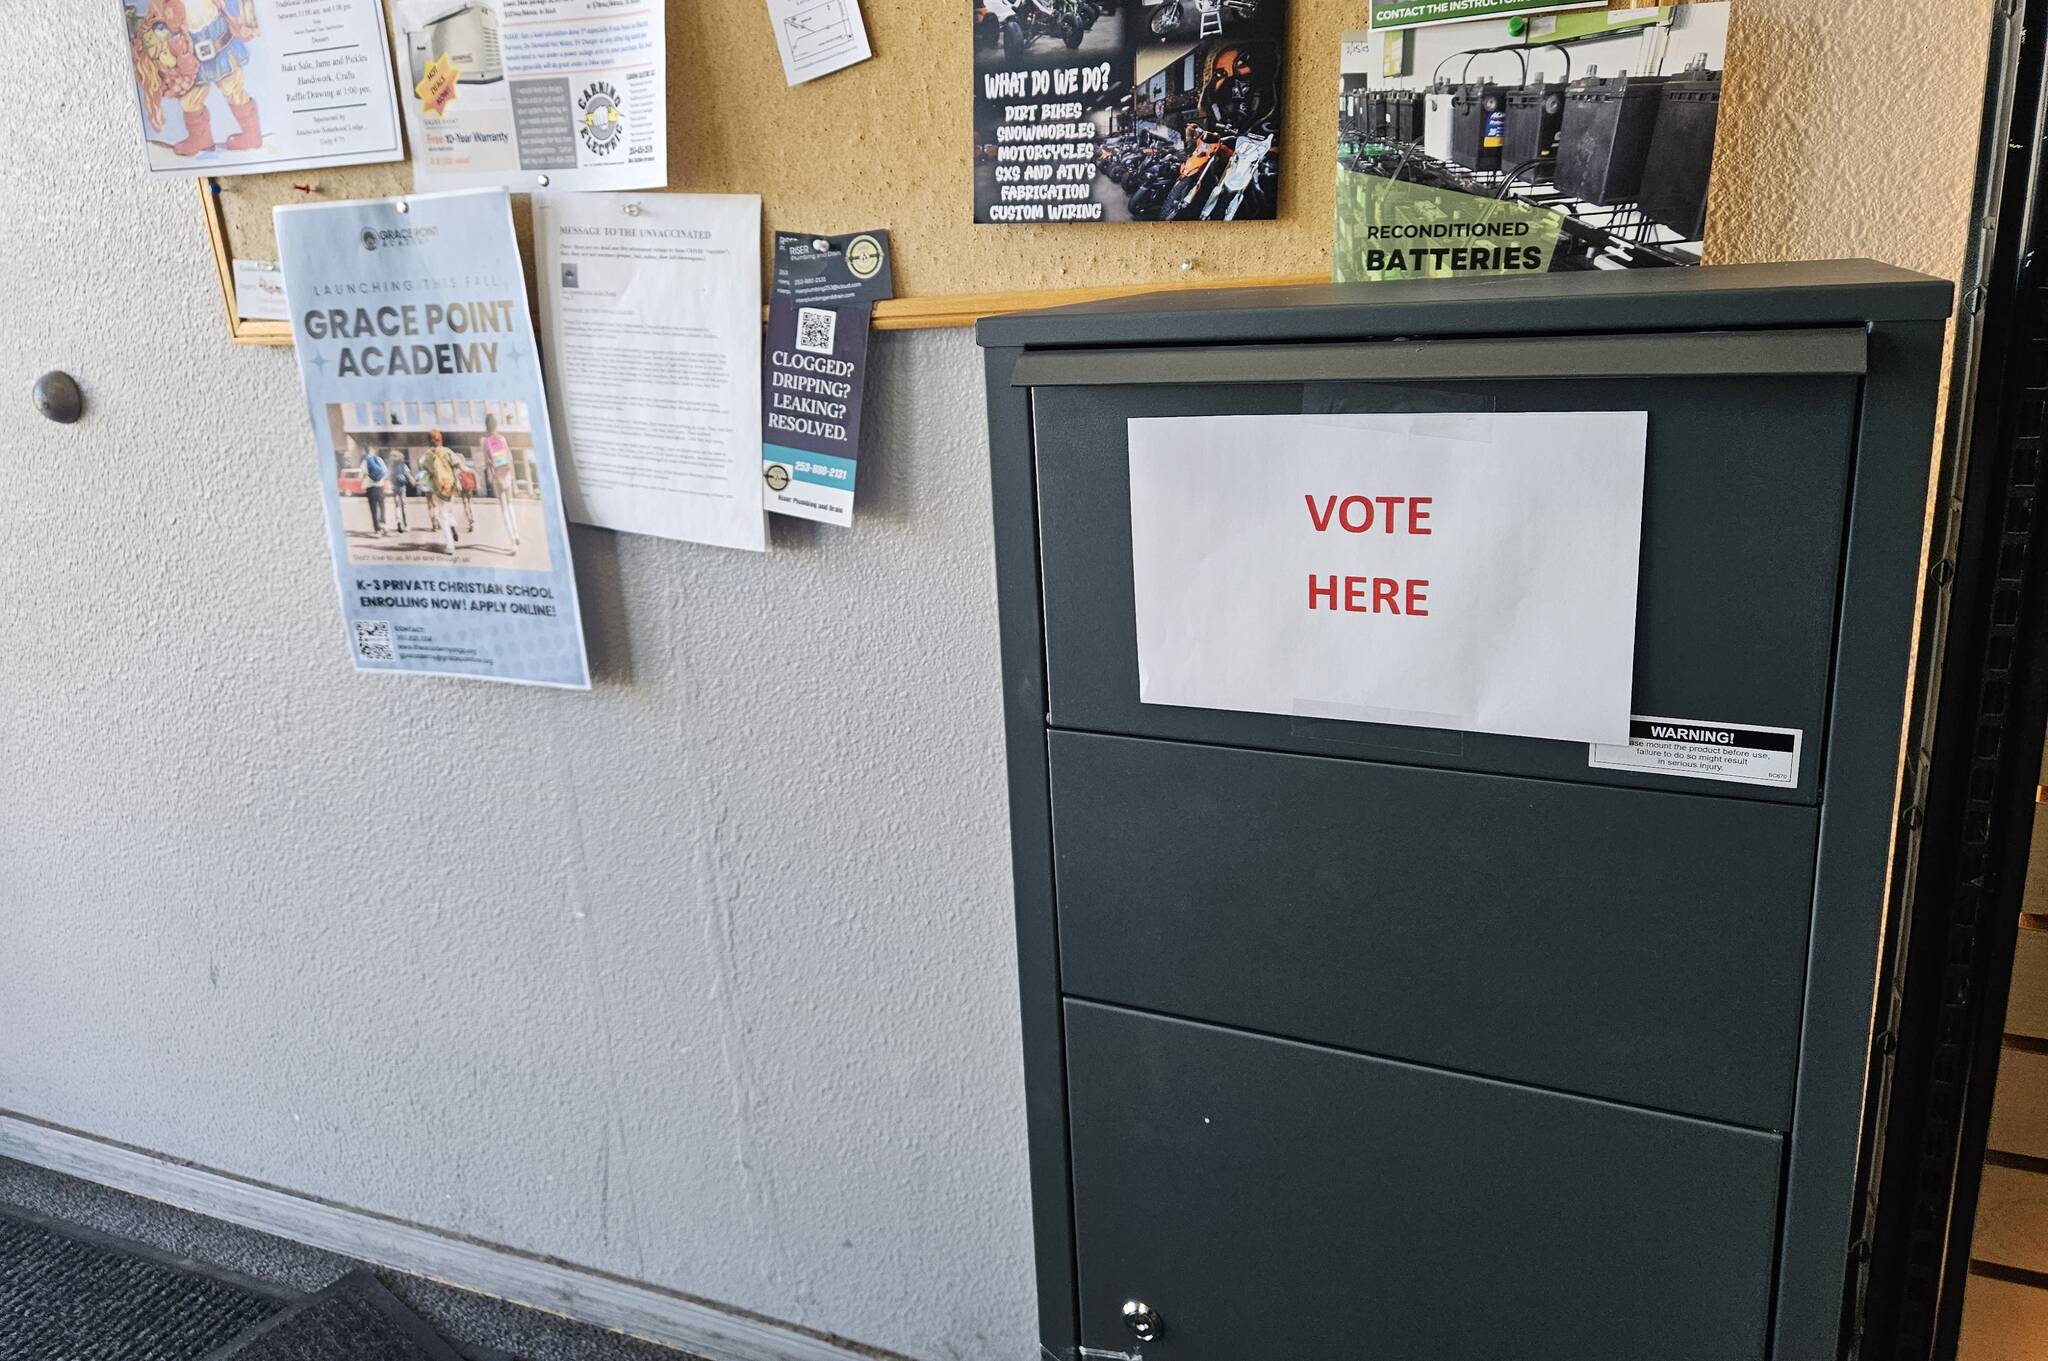 It’s legal in Washington to be a third-party ballot collector, but election officials strongly suggest using official drop boxes instead. Photo by Ray Miller-Still, Sound Publishing